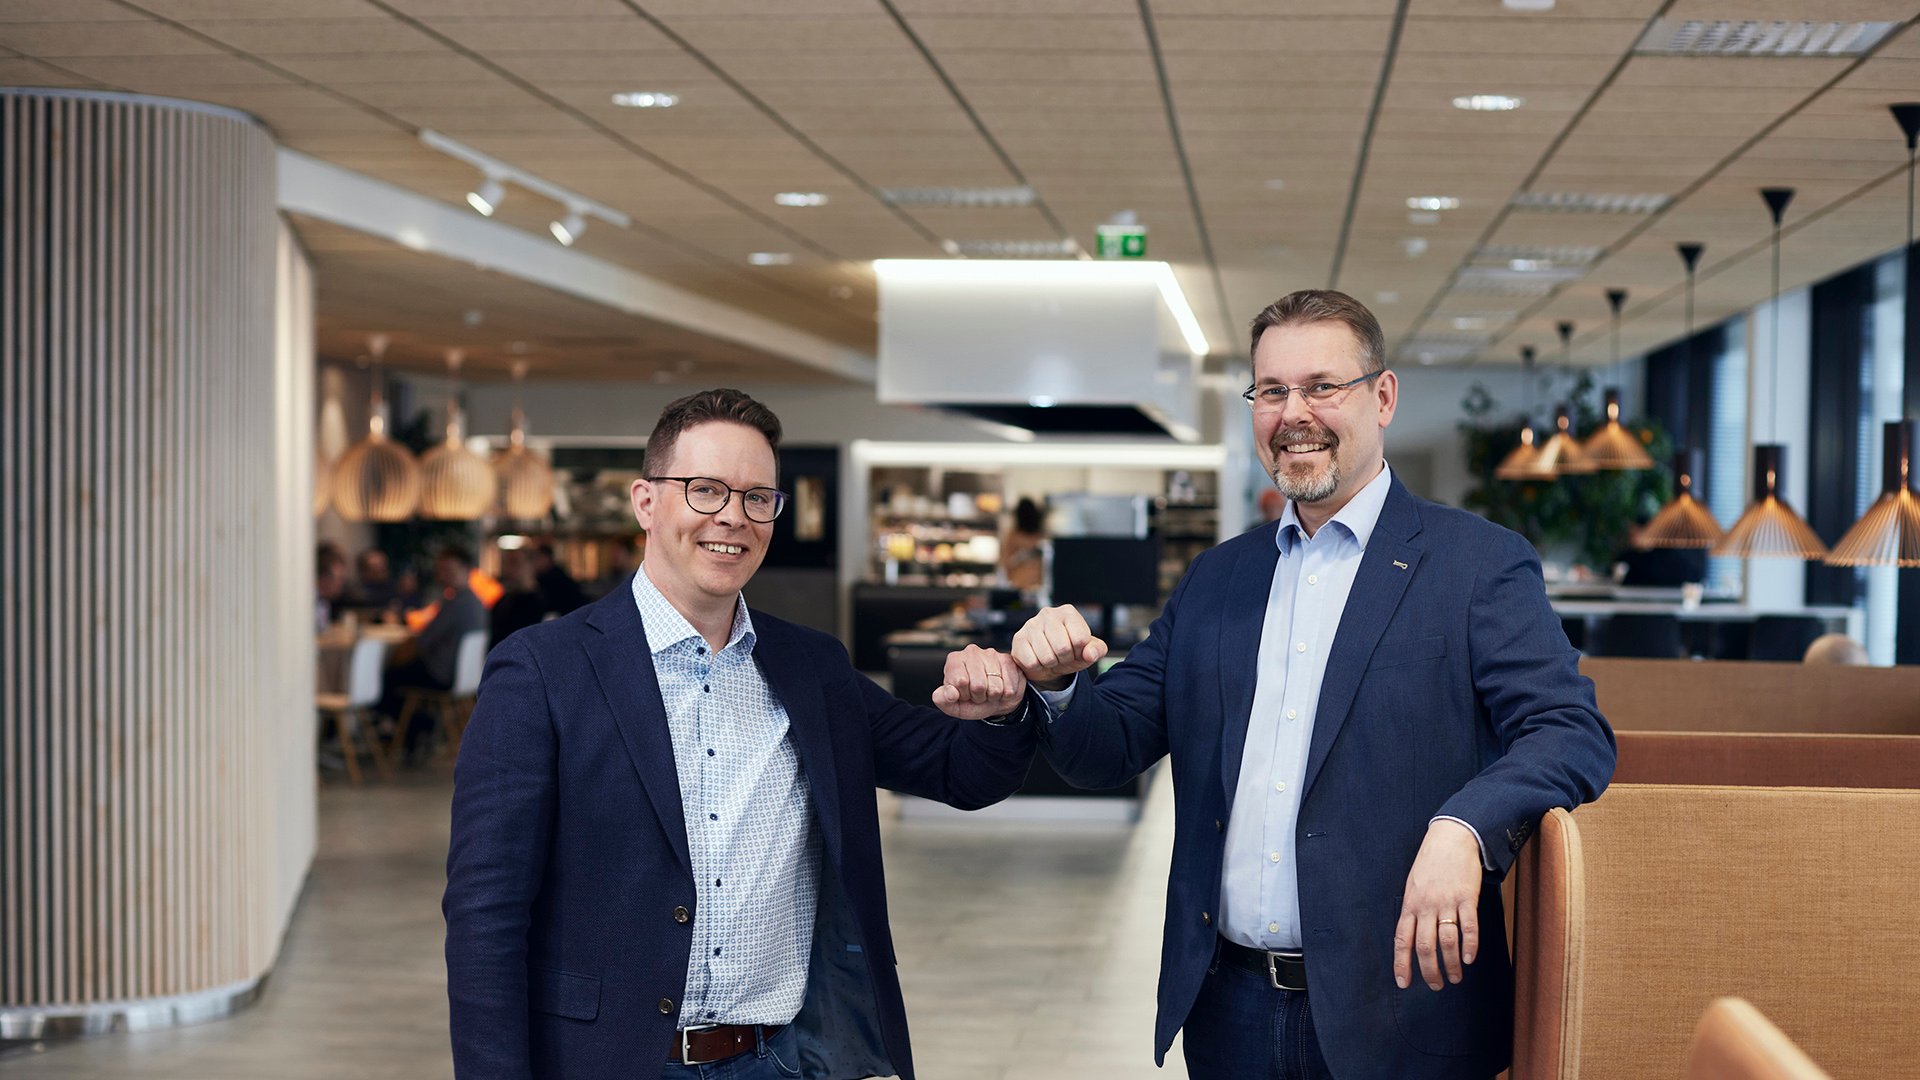 Our building services operations expand – Oulu-based Airlon and Silvea become part of AINS Group